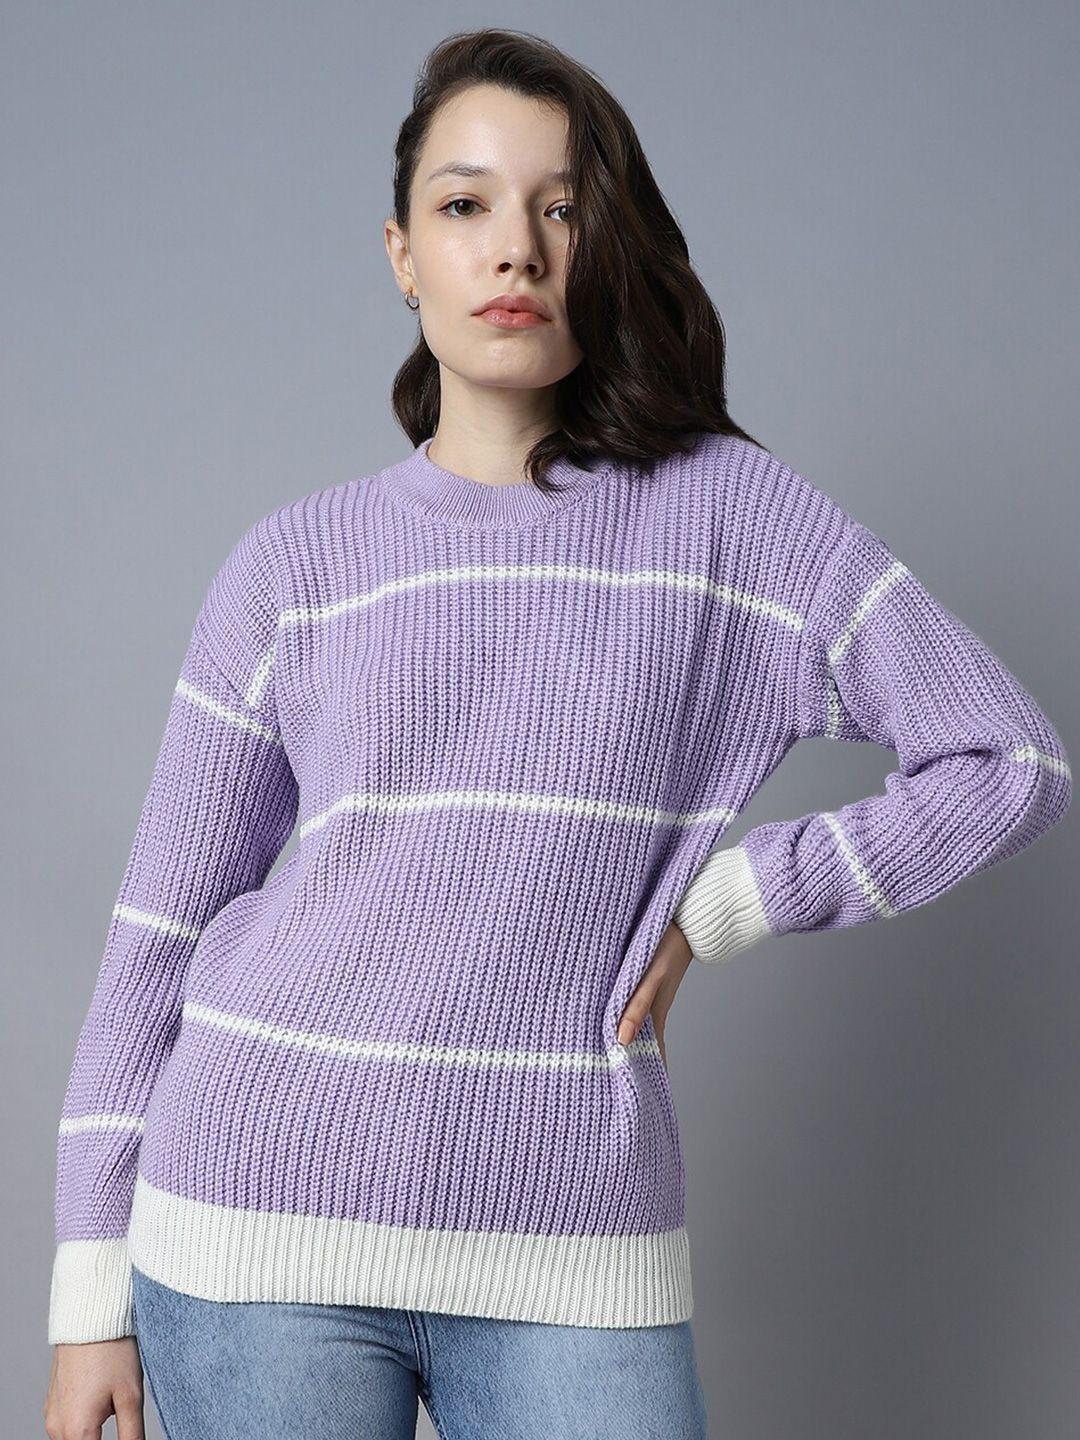 high-star-striped-round-neck-long-sleeves-acrylic-pullover-sweaters